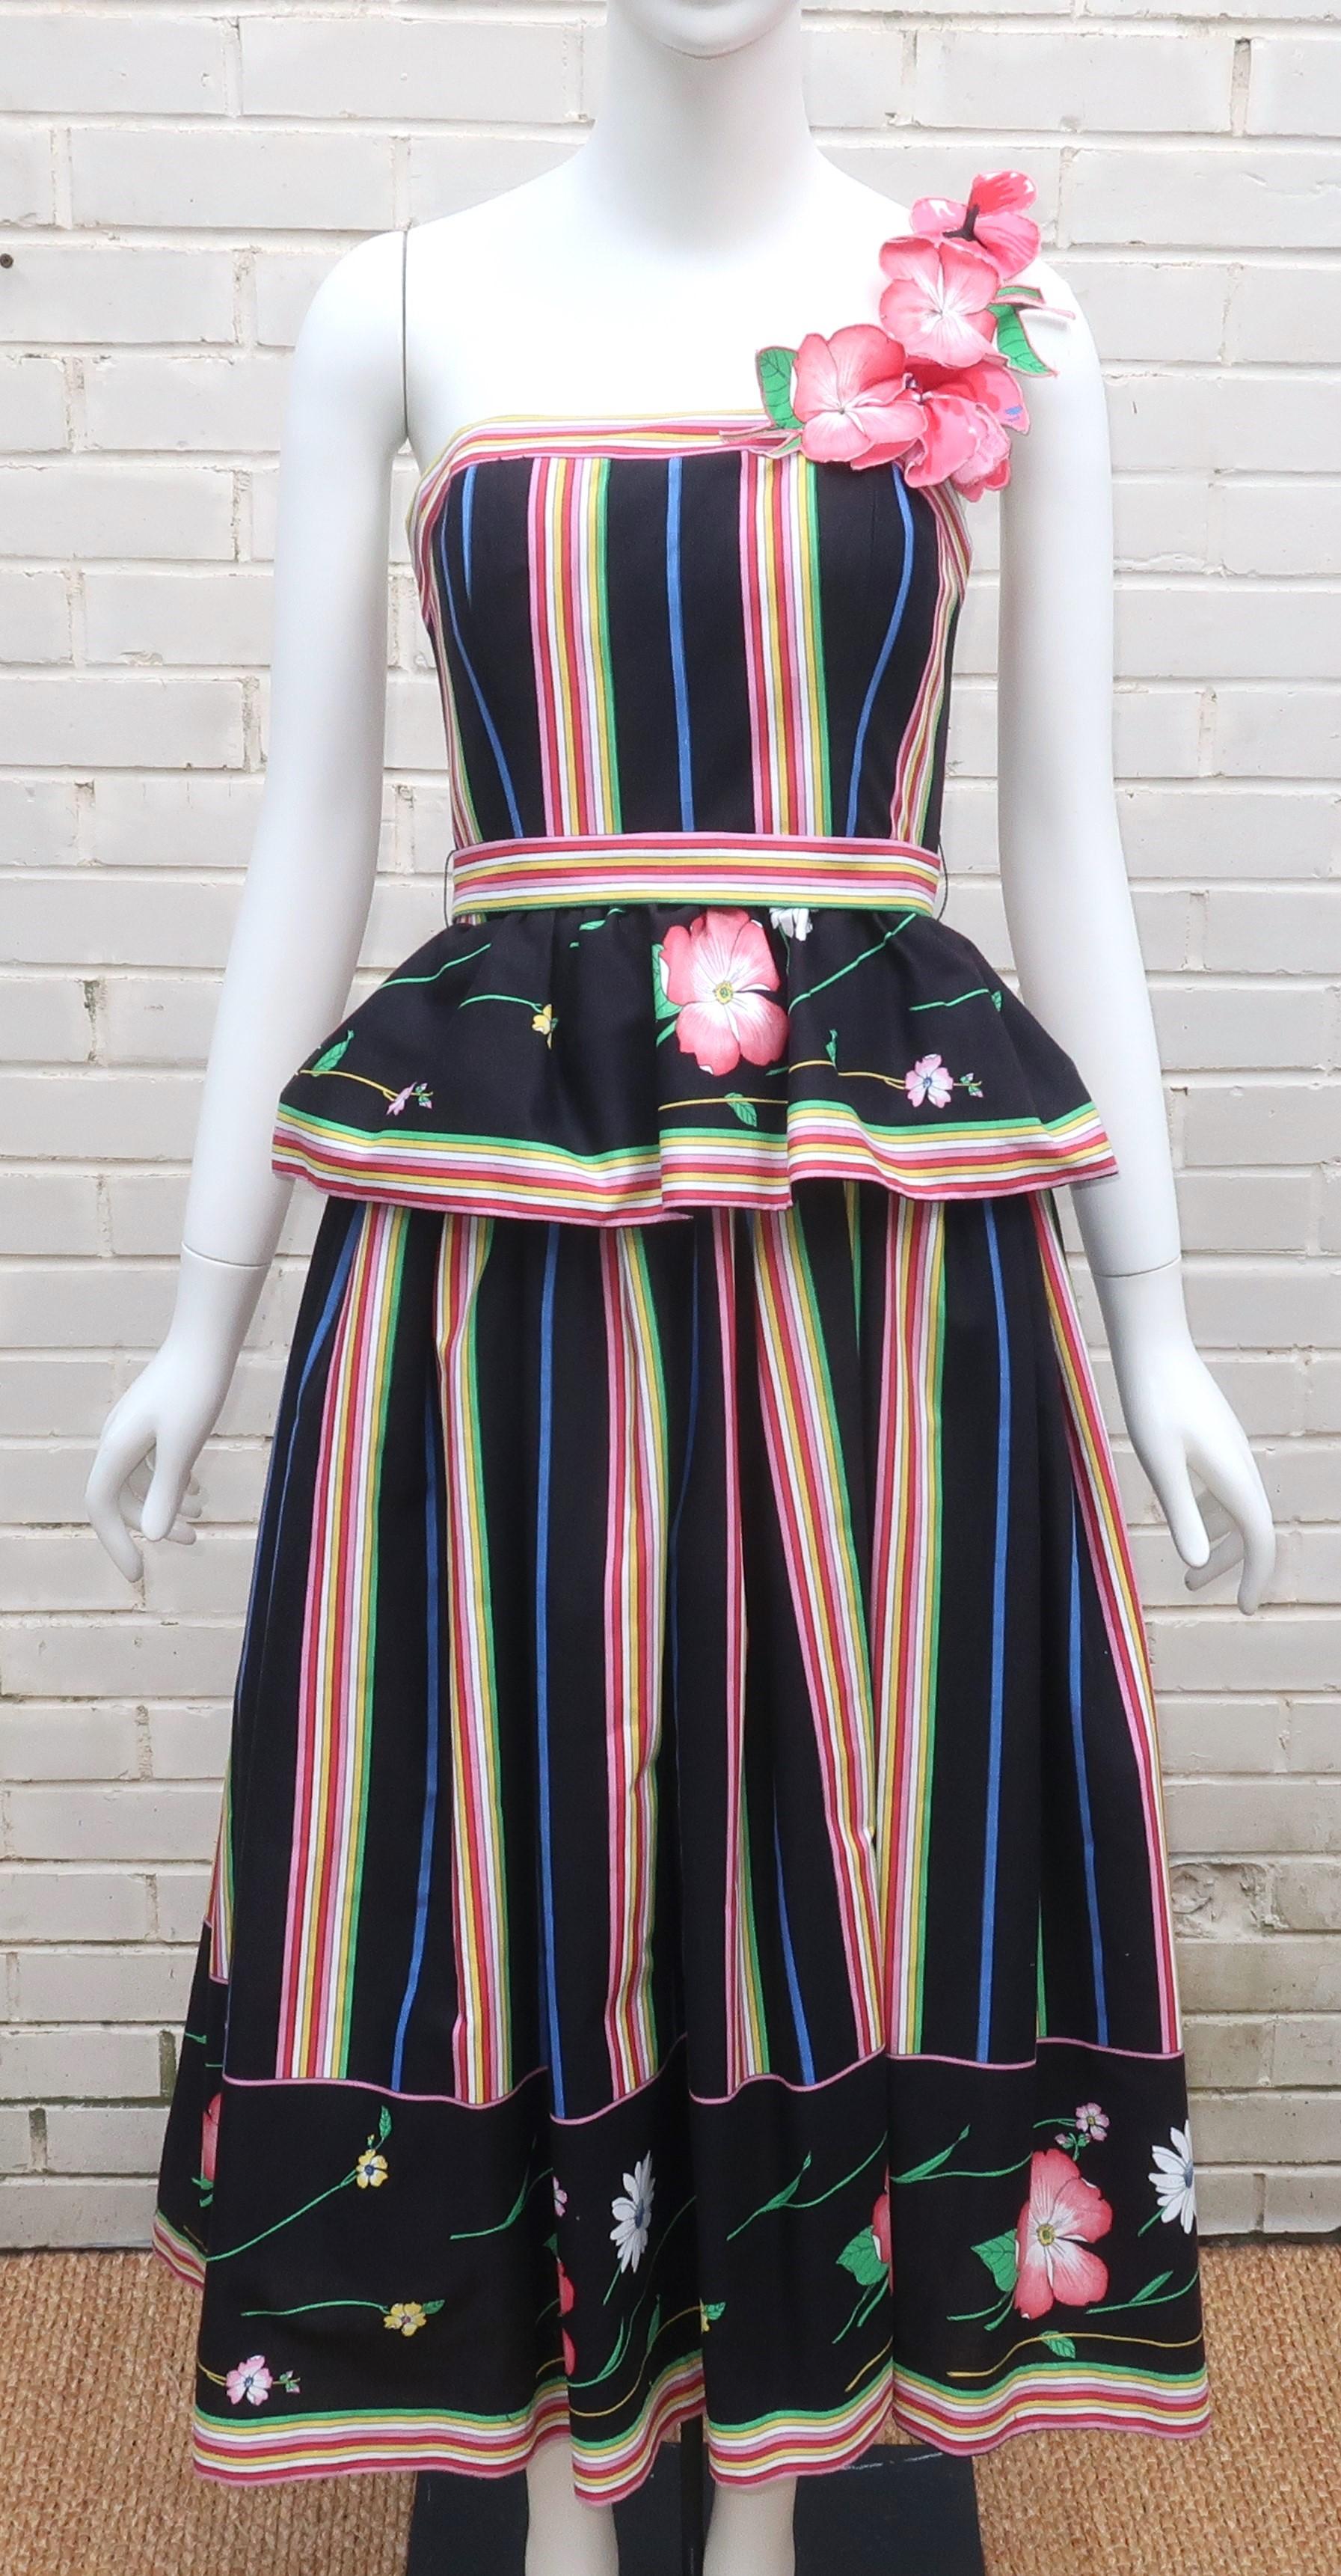 1970's polished cotton sundress in a floral and stripe print with a mix of cheerful colors including pink, red, yellow, green and blue on a black background.  The one shouldered design has a peplum waist and full skirt lined with a netted crinoline.